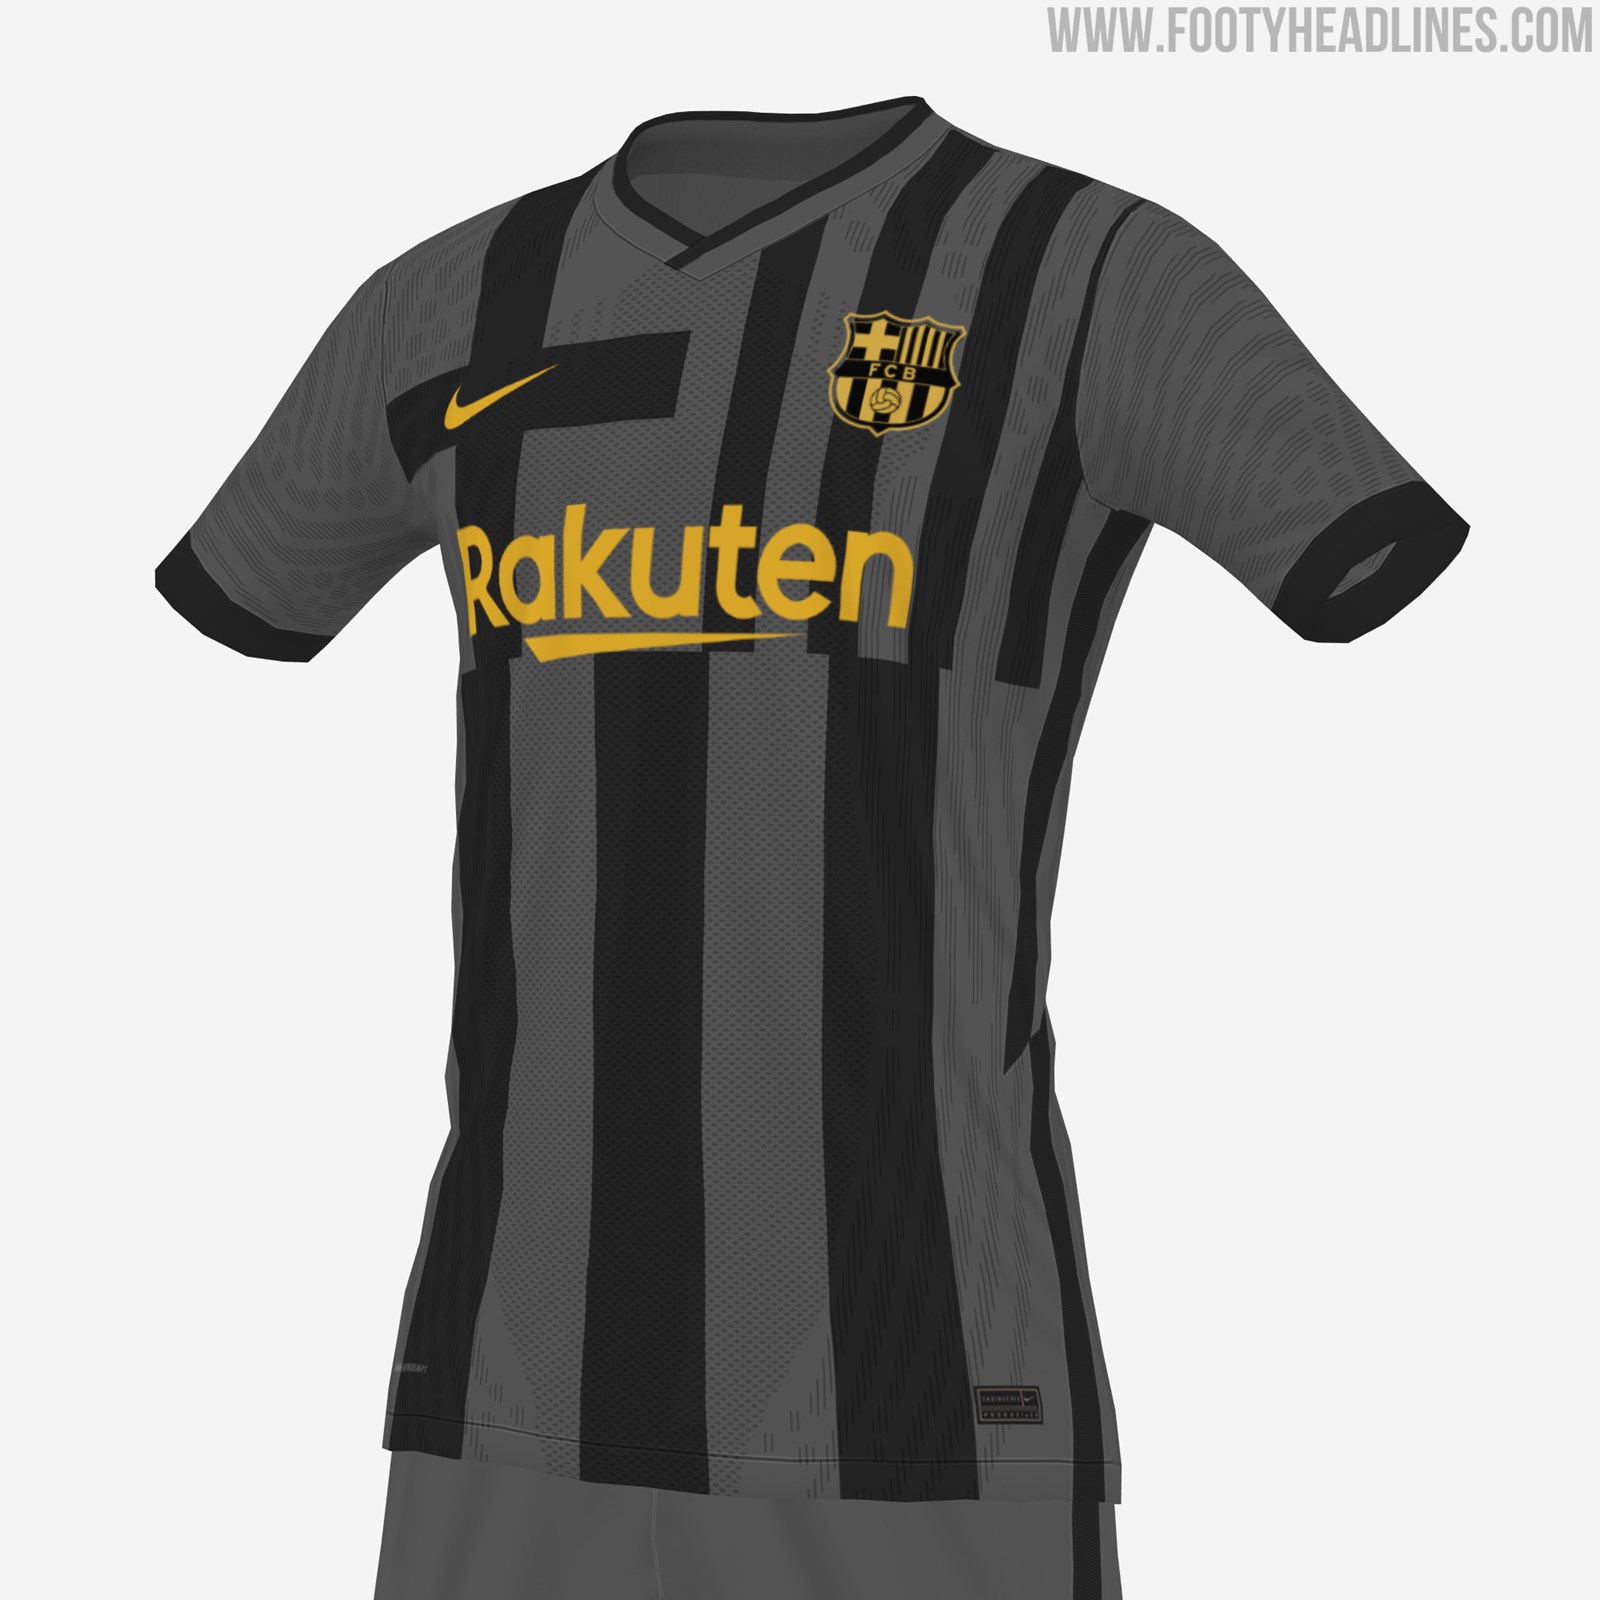 Au! 47+ Lister over Fc Barcelona Away Kit 2021/22: You can find other